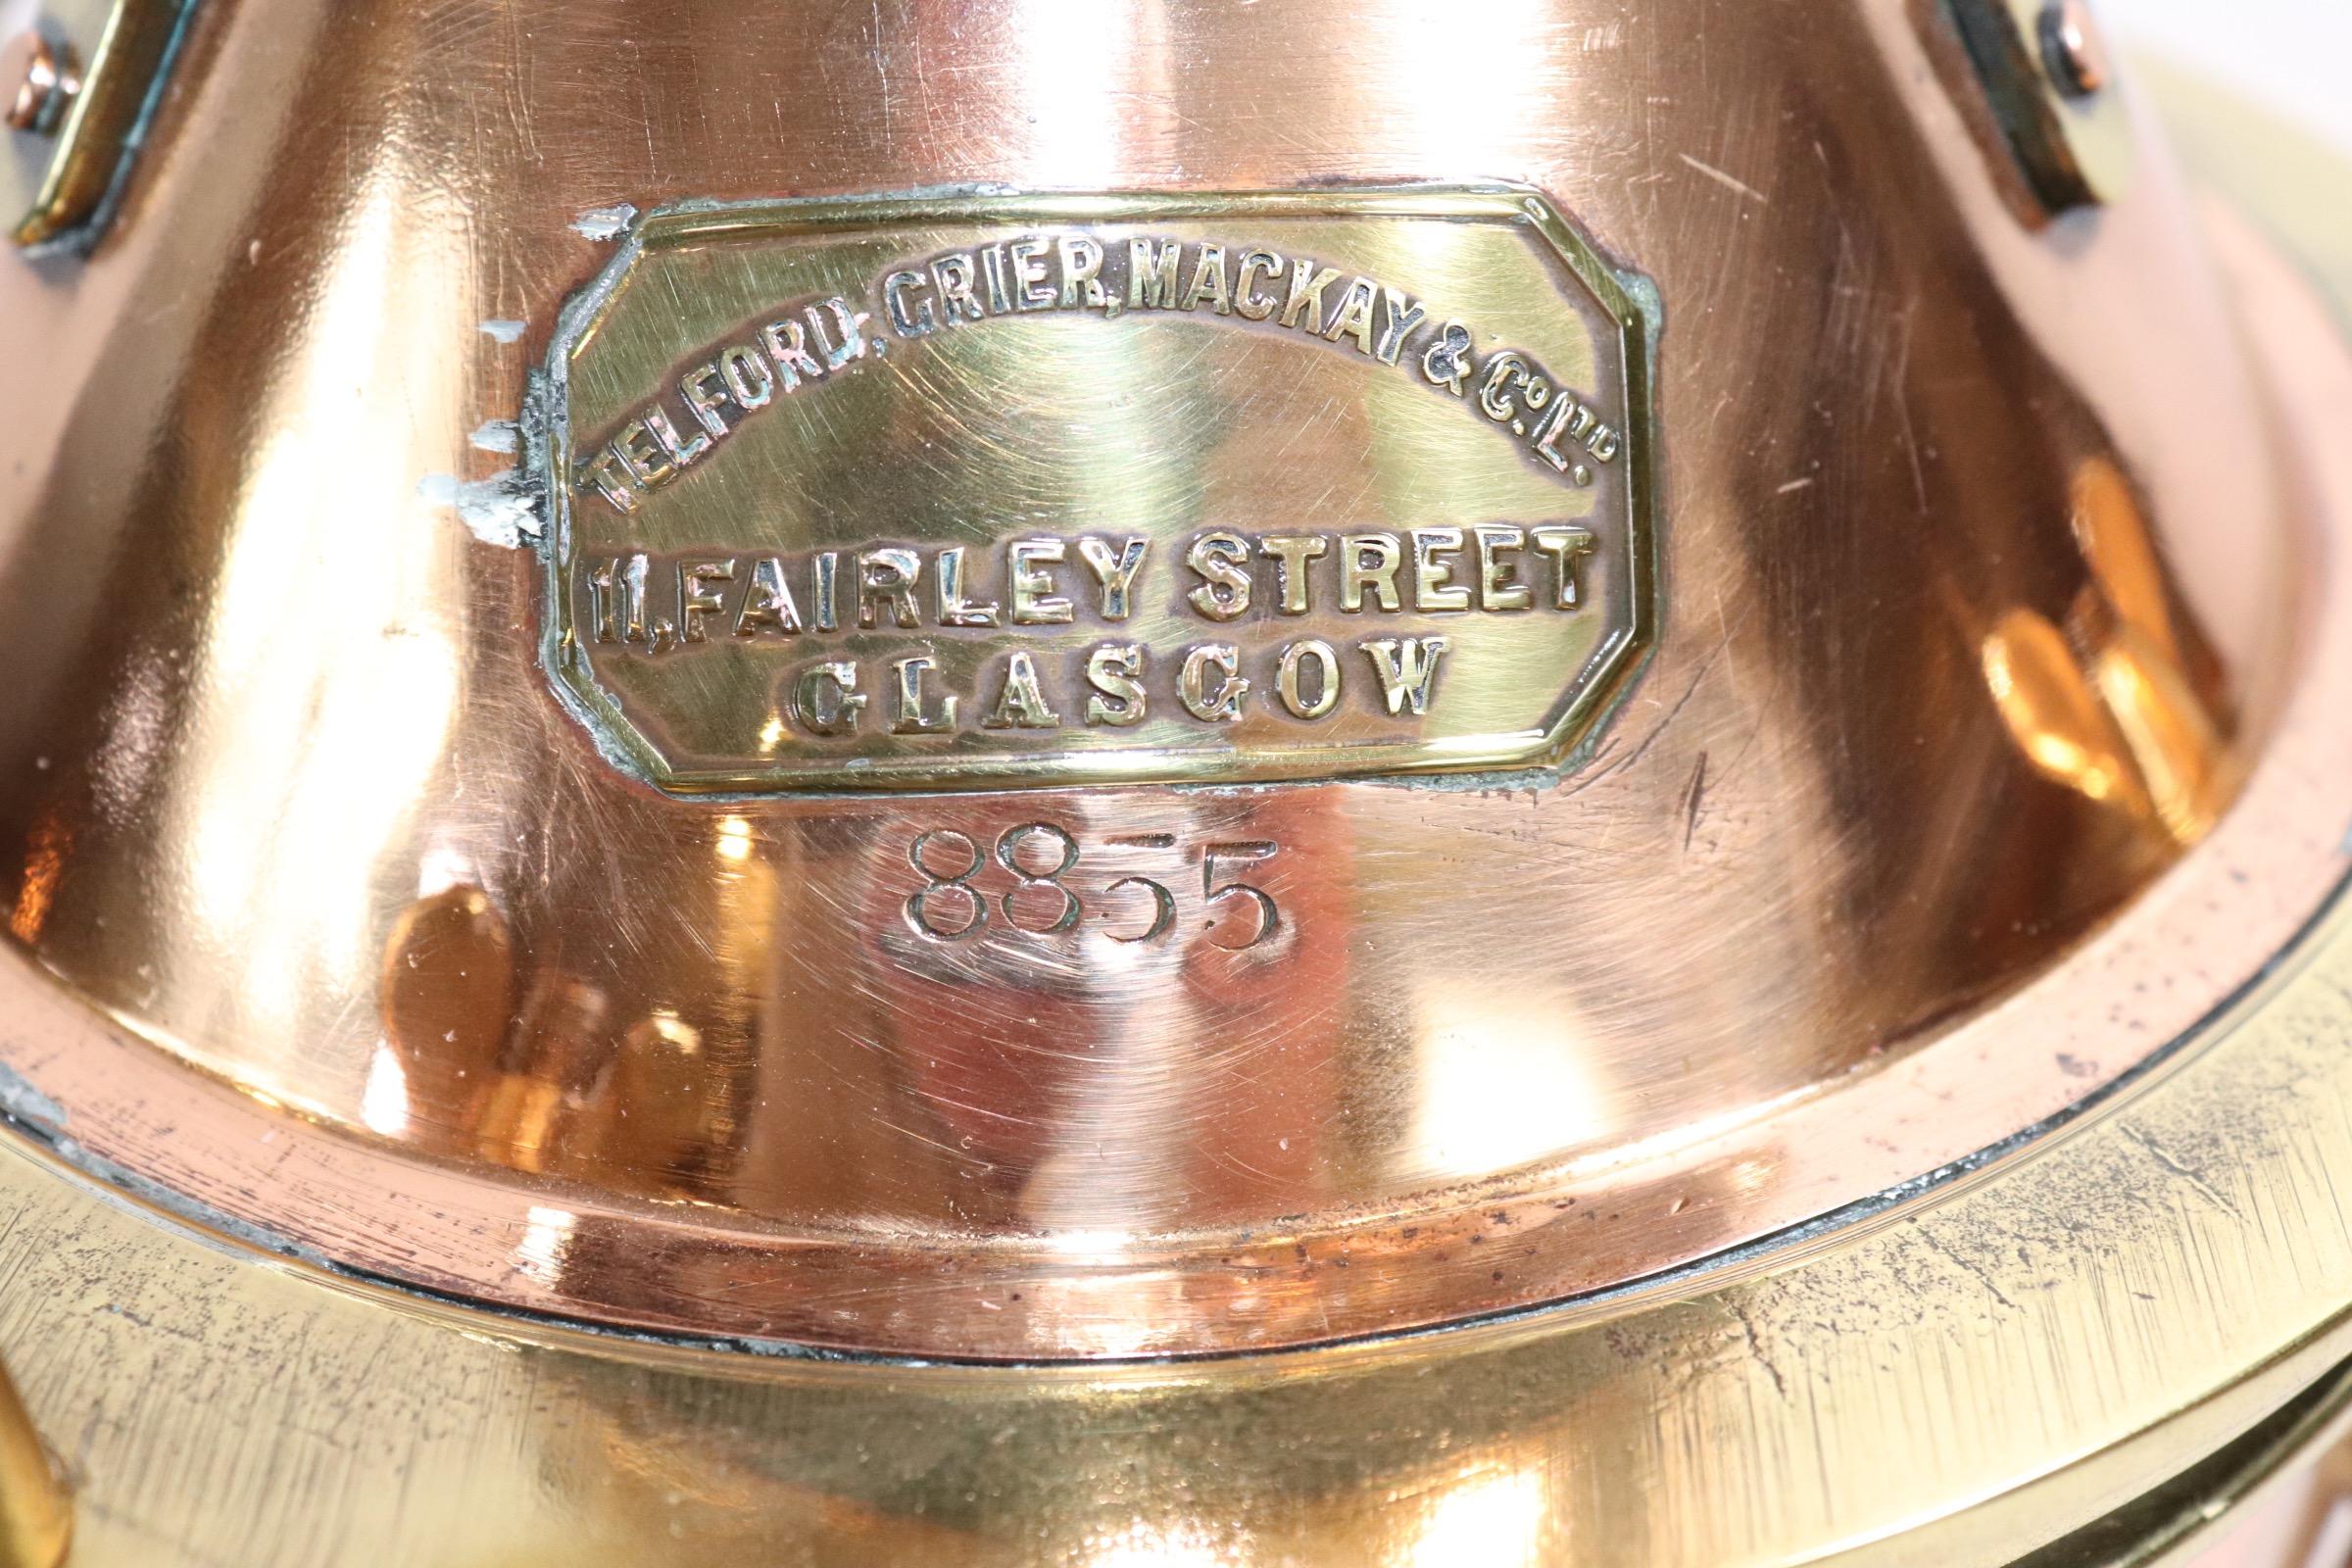 Sturdily built solid copper ships anchor lantern with fresnel glass lens, heavy protective brass bars, brass makers badge with name of Telford Grier, Mackey & Co. Limited , Glasgow. Mounted to a thick wood base and wired with socket for home